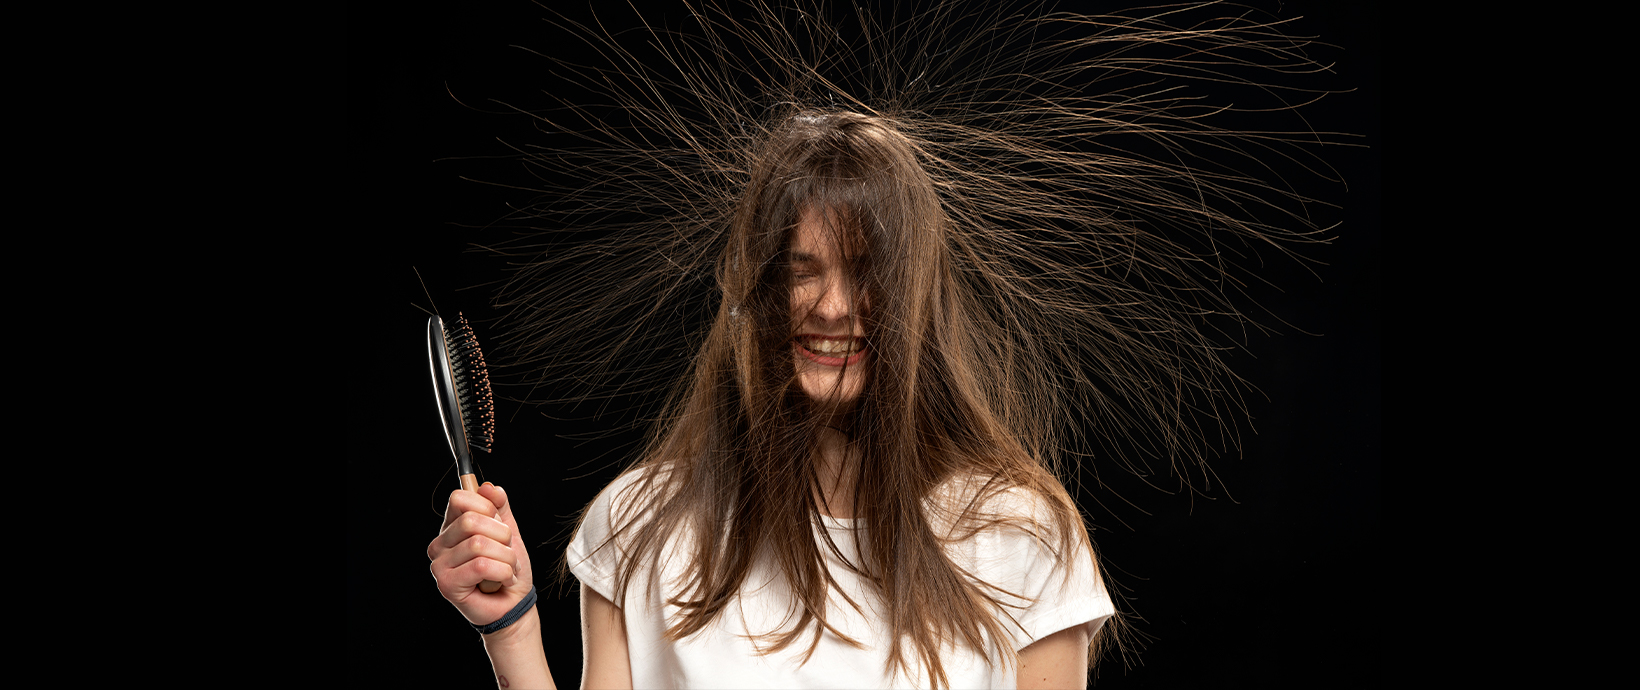 Digital Debunking: Can You Avoid the Shock of Static Electricity With Your Palm?